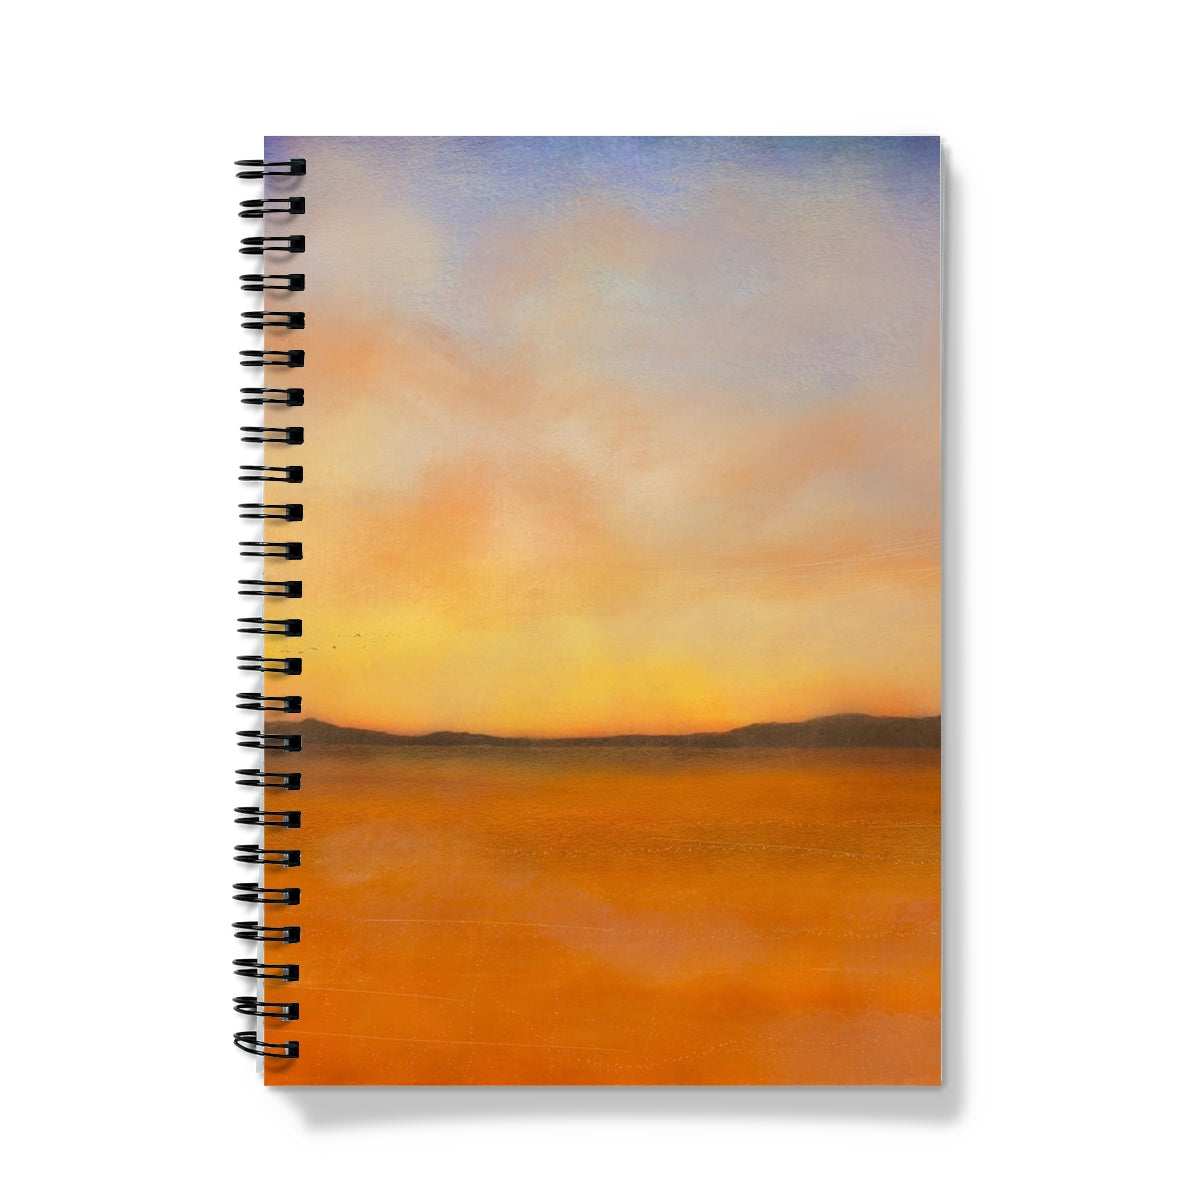 Islay Dawn Art Gifts Notebook-Journals & Notebooks-Hebridean Islands Art Gallery-A4-Lined-Paintings, Prints, Homeware, Art Gifts From Scotland By Scottish Artist Kevin Hunter